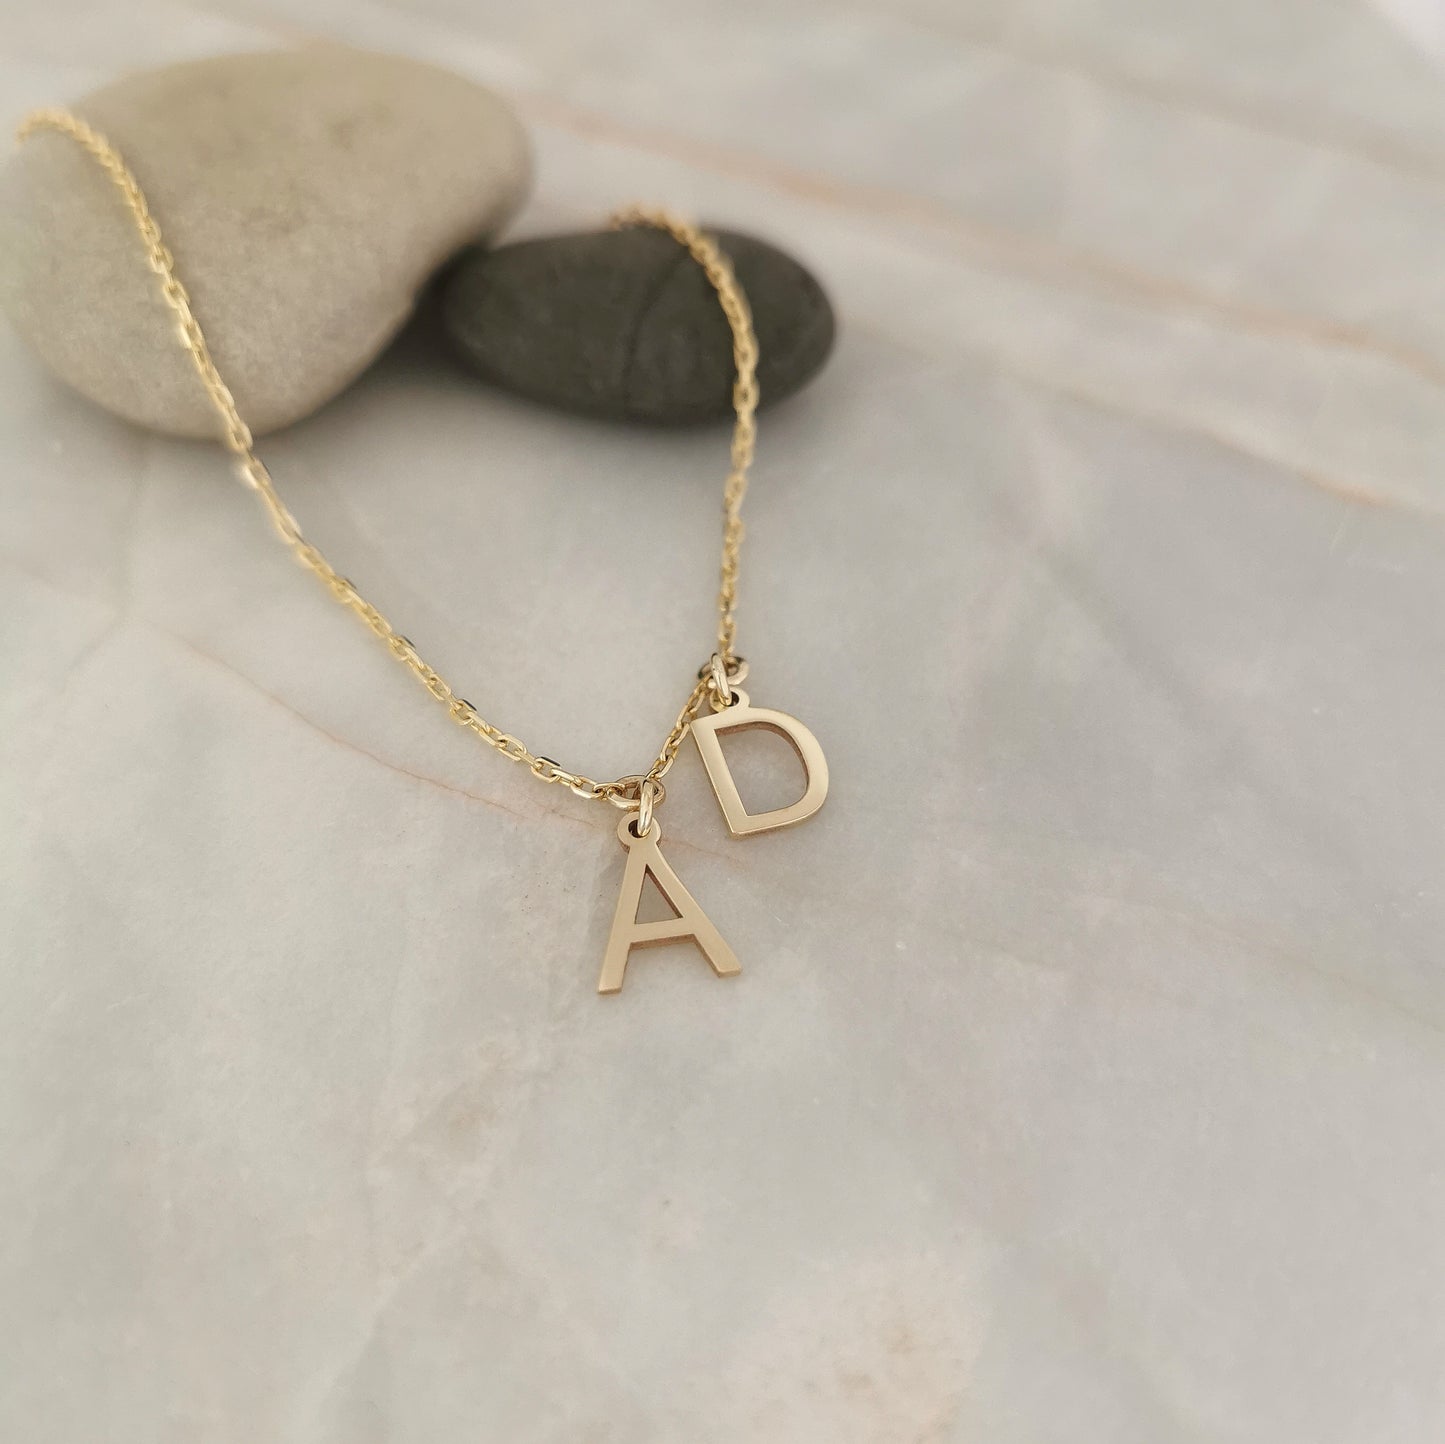 Solid 9ct Gold Initial Necklace with Two 9ct Gold Initial Charms Attached